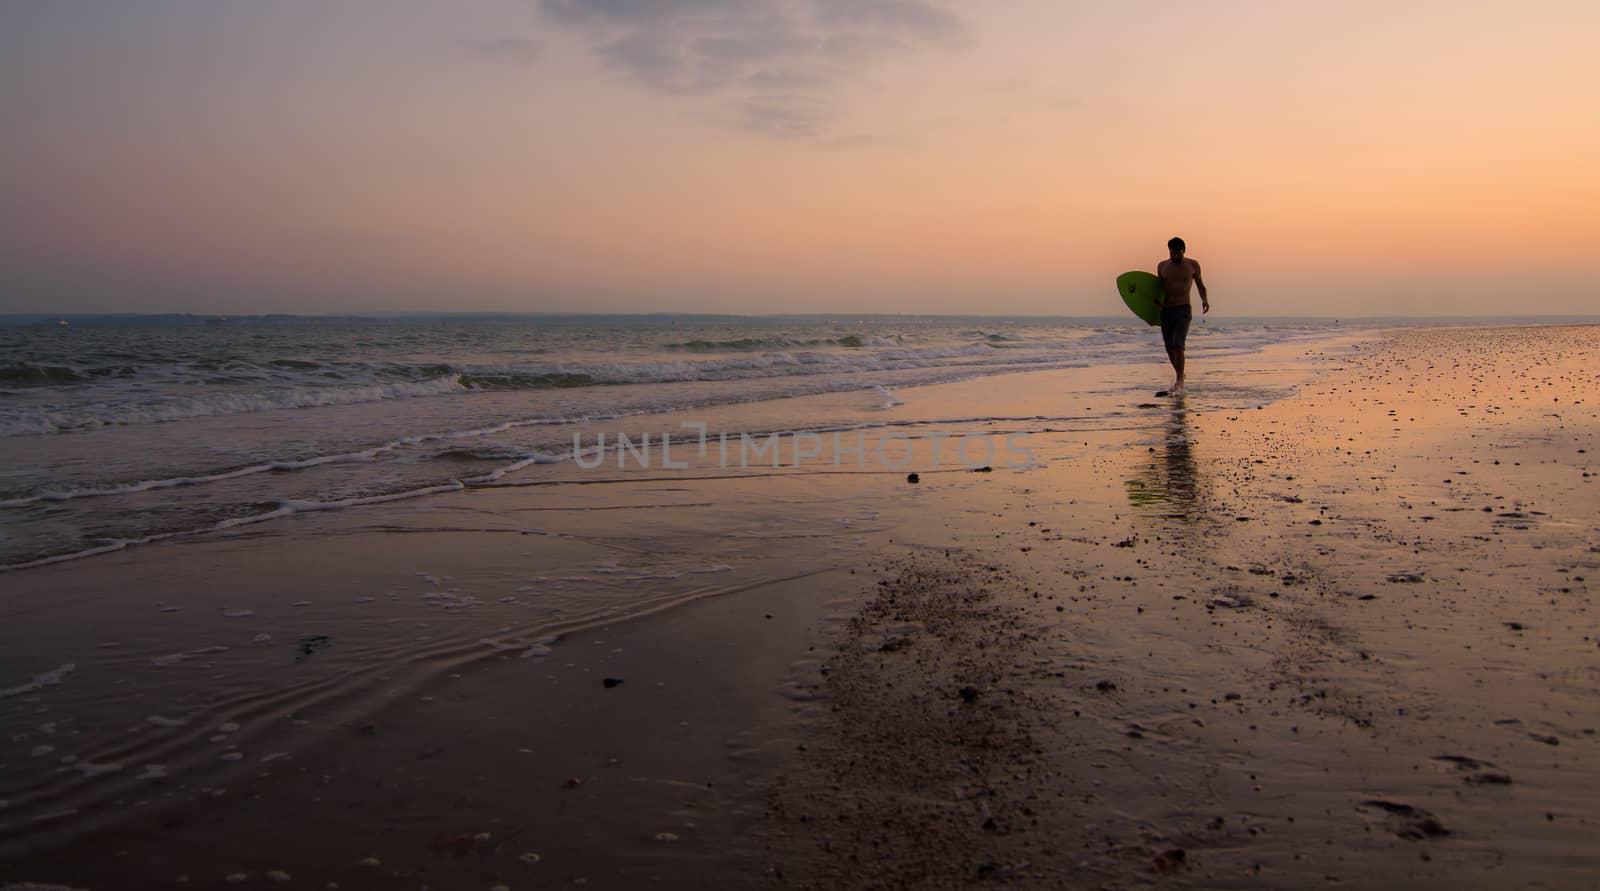 A single surfer walking along the shore, with the sun setting behind him